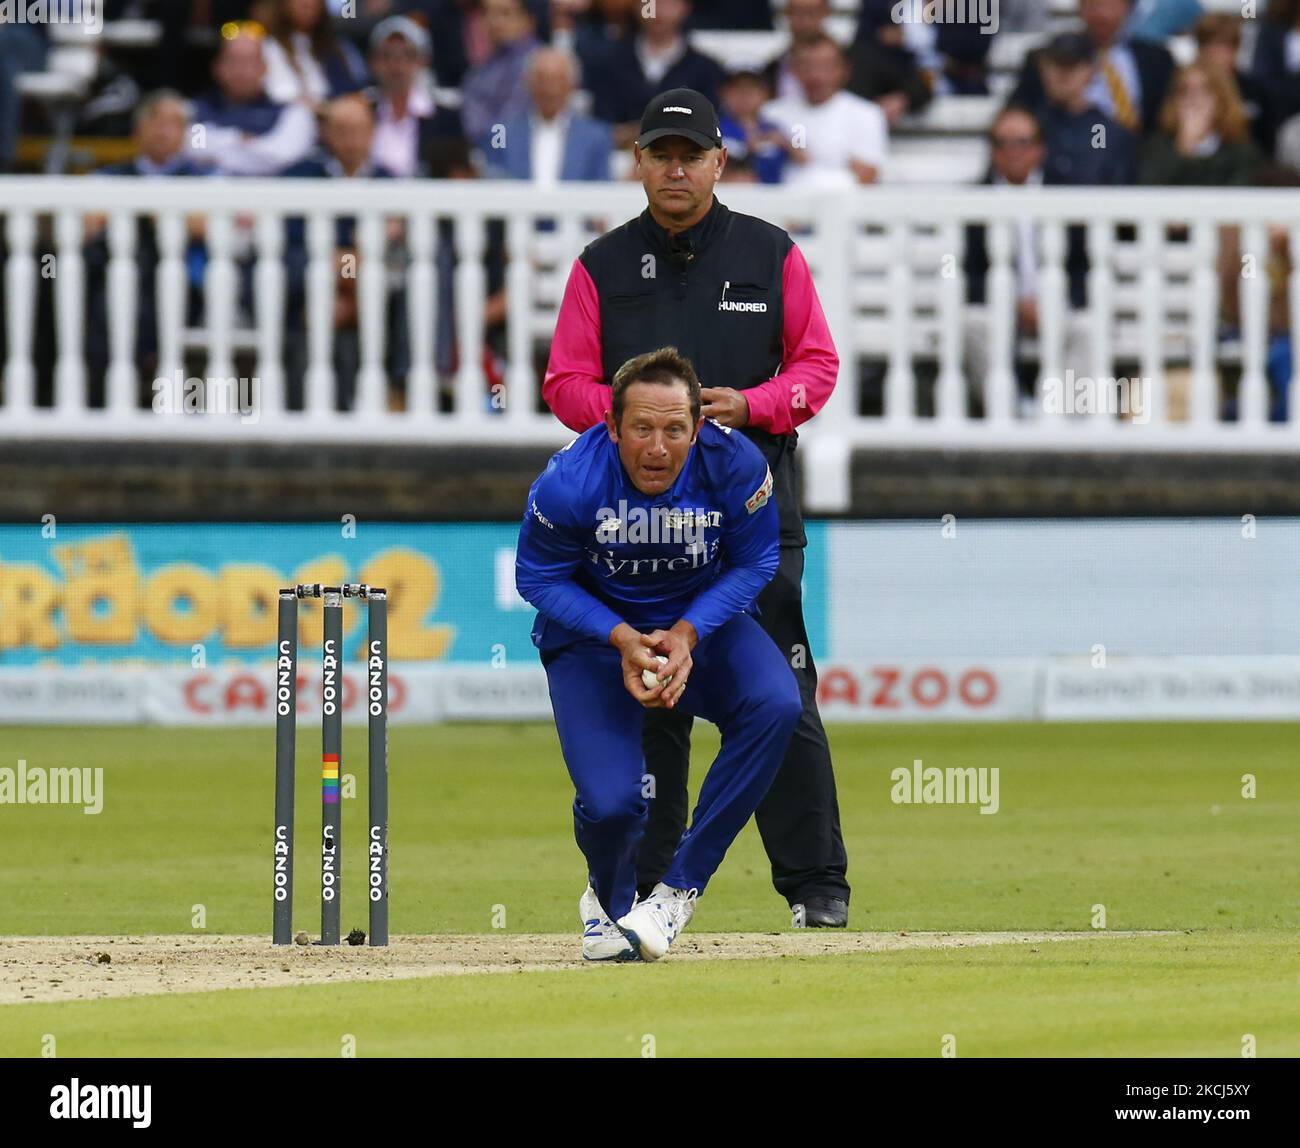 Roelof Van Der Merwe of London Spirit caught and bowled Devon Conway of Southern Brave during The Hundred between London Spirit Men and Southern Brave Men at Lord's Stadium , London, UK on August 1, 2021. (Photo by Action Foto Sport/NurPhoto) Stock Photo